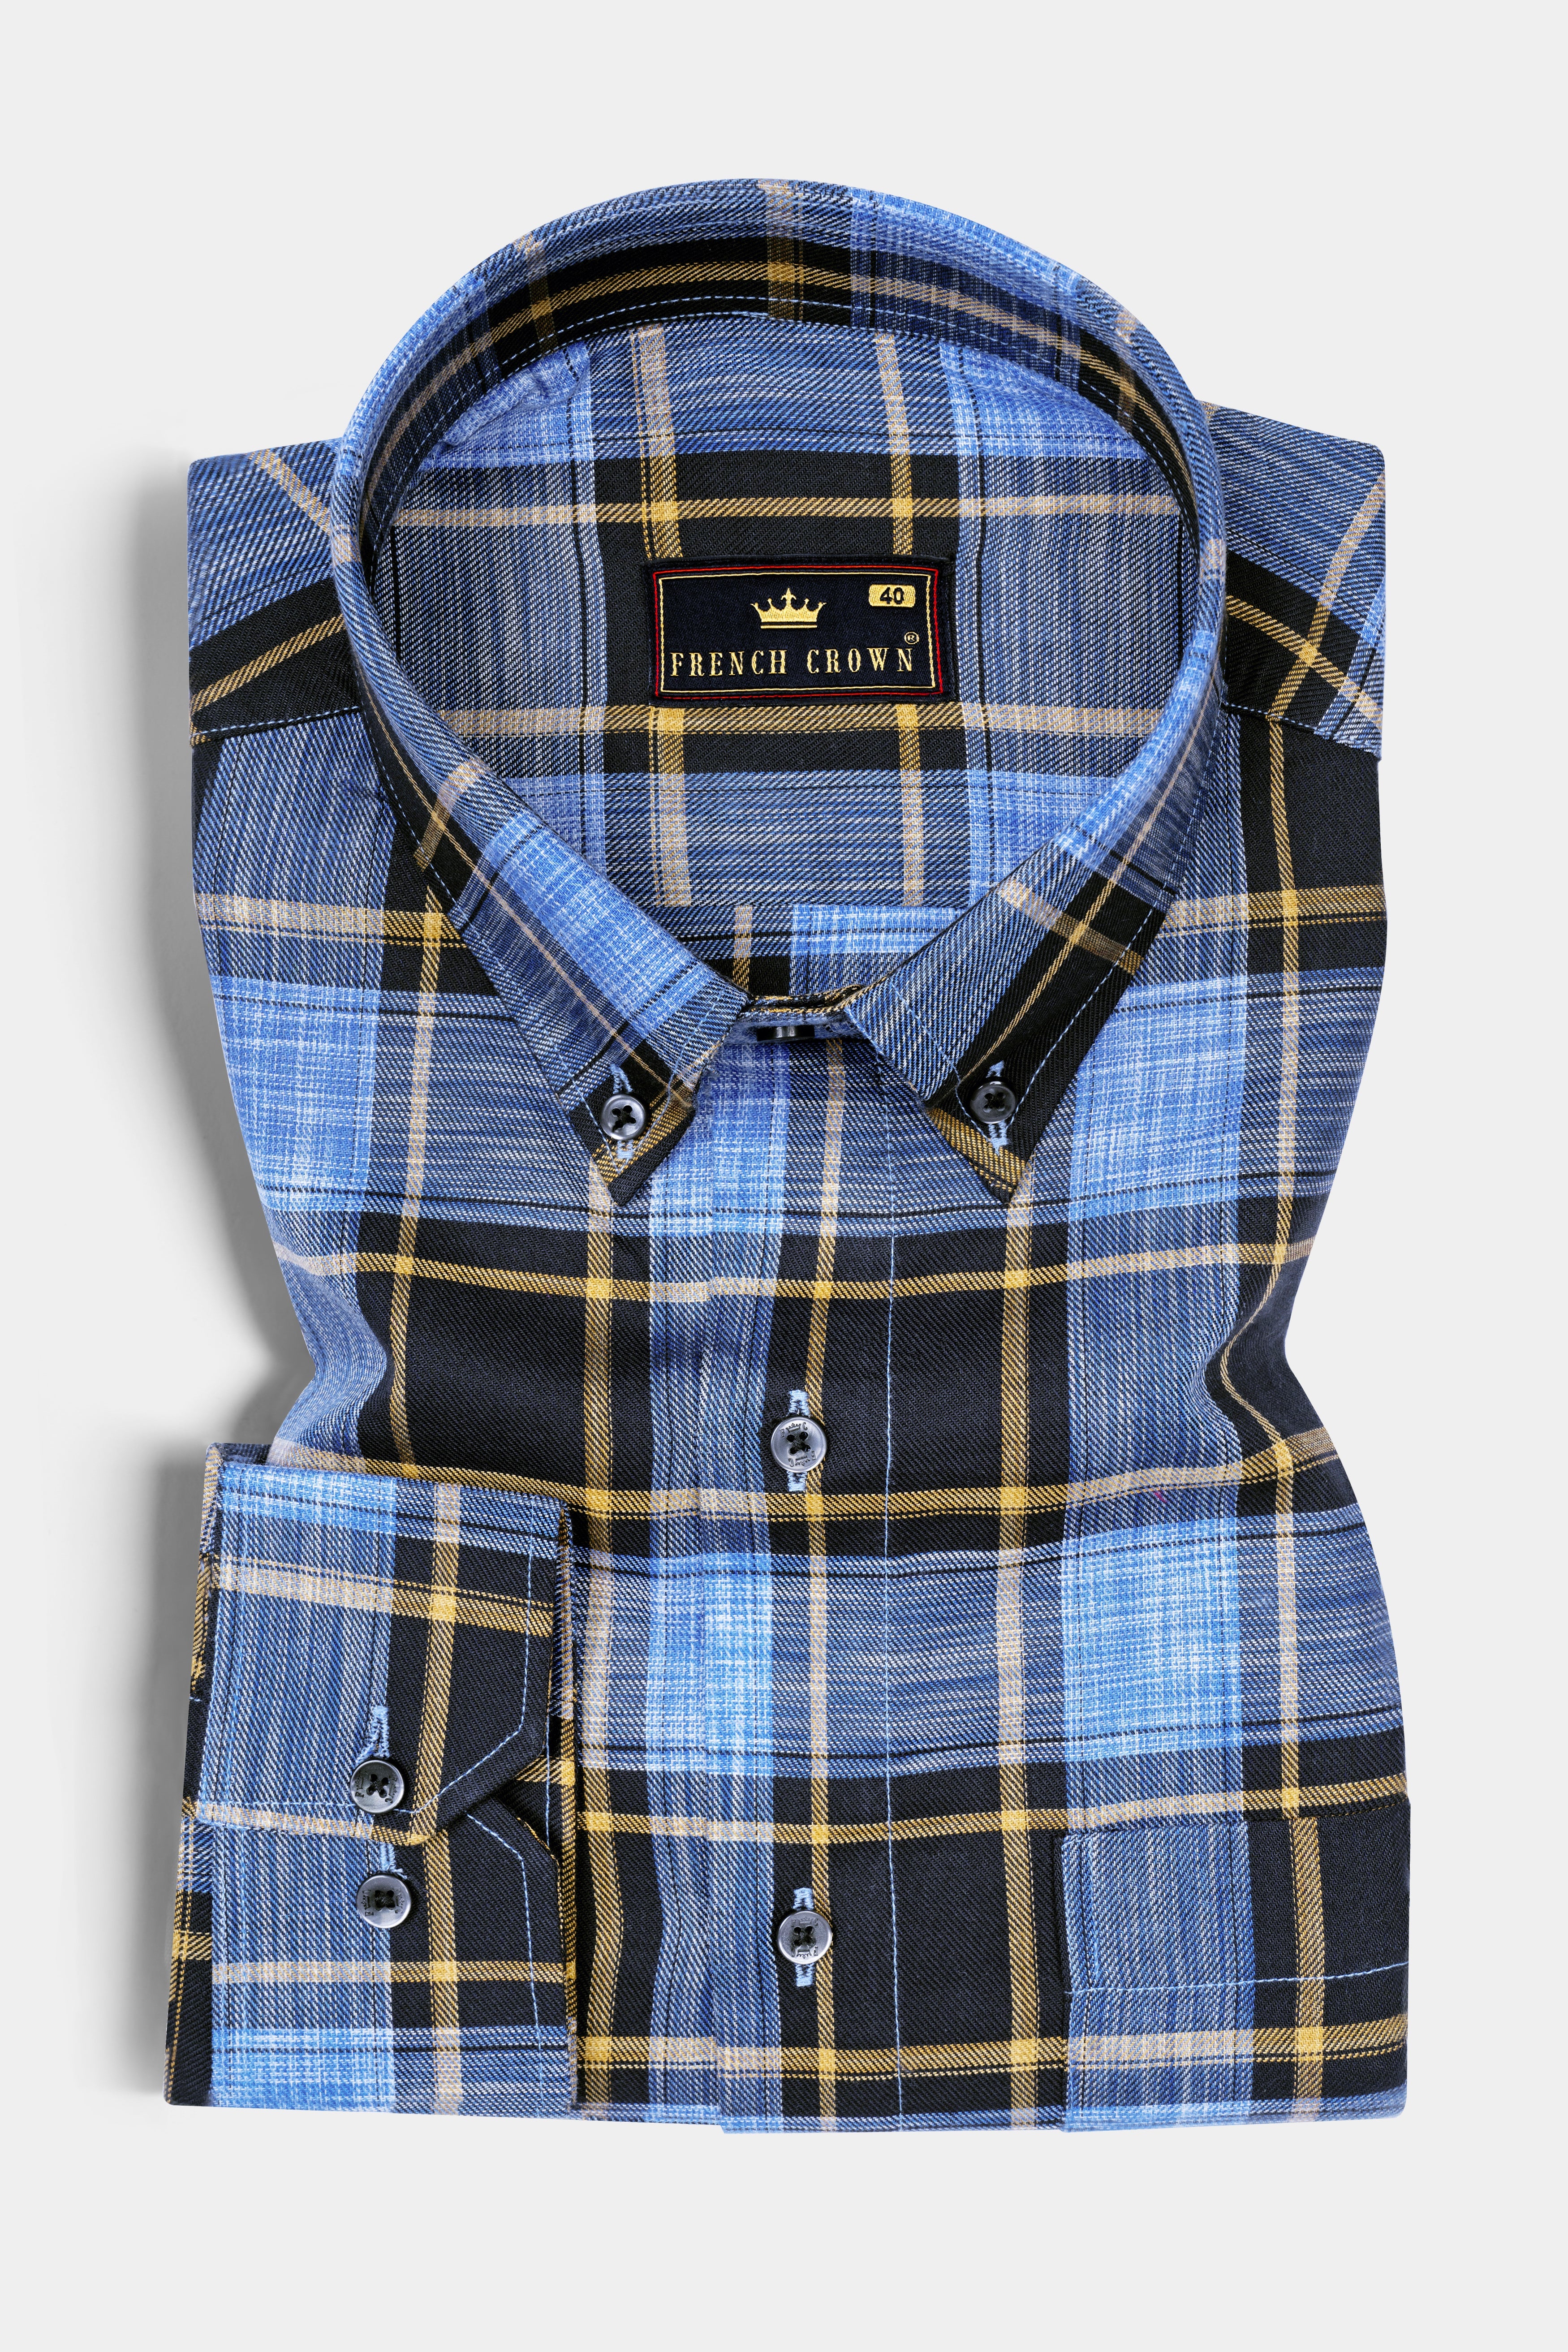 Glaucous Blue with Black and Brown Checks Plaid Twill Giza Cotton Shirt